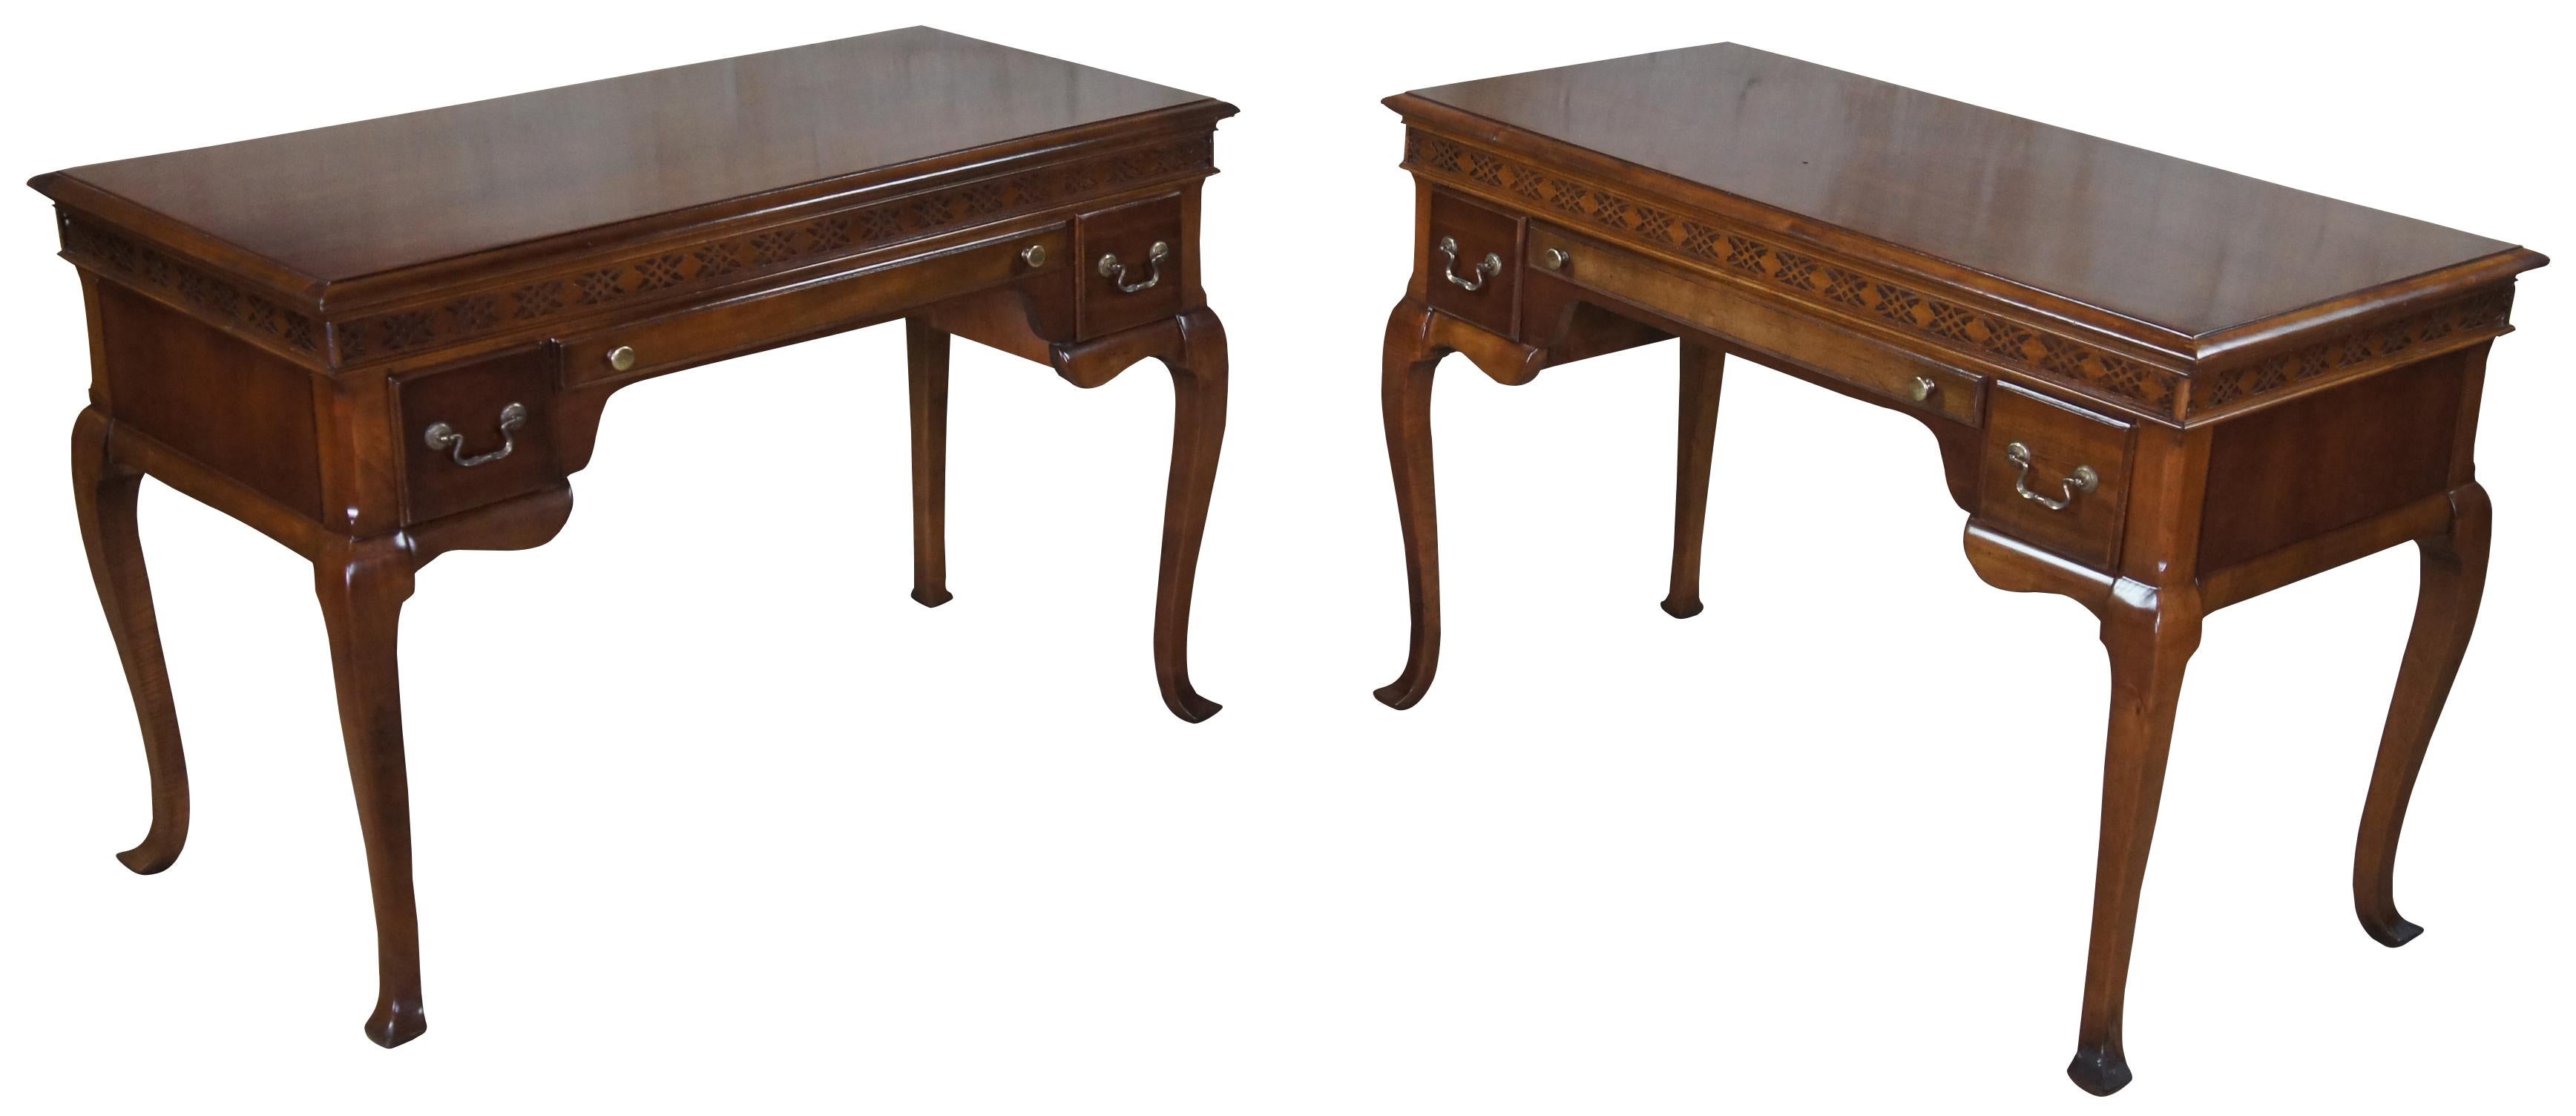 A beautiful pair of early 20th century cherry Queen Anne library desks. Features a rectangular form with ogee edge over fretworked apron. A pencil drawer at the center is flanked by 2 additional drawers. The desk is supported by cabriole legs